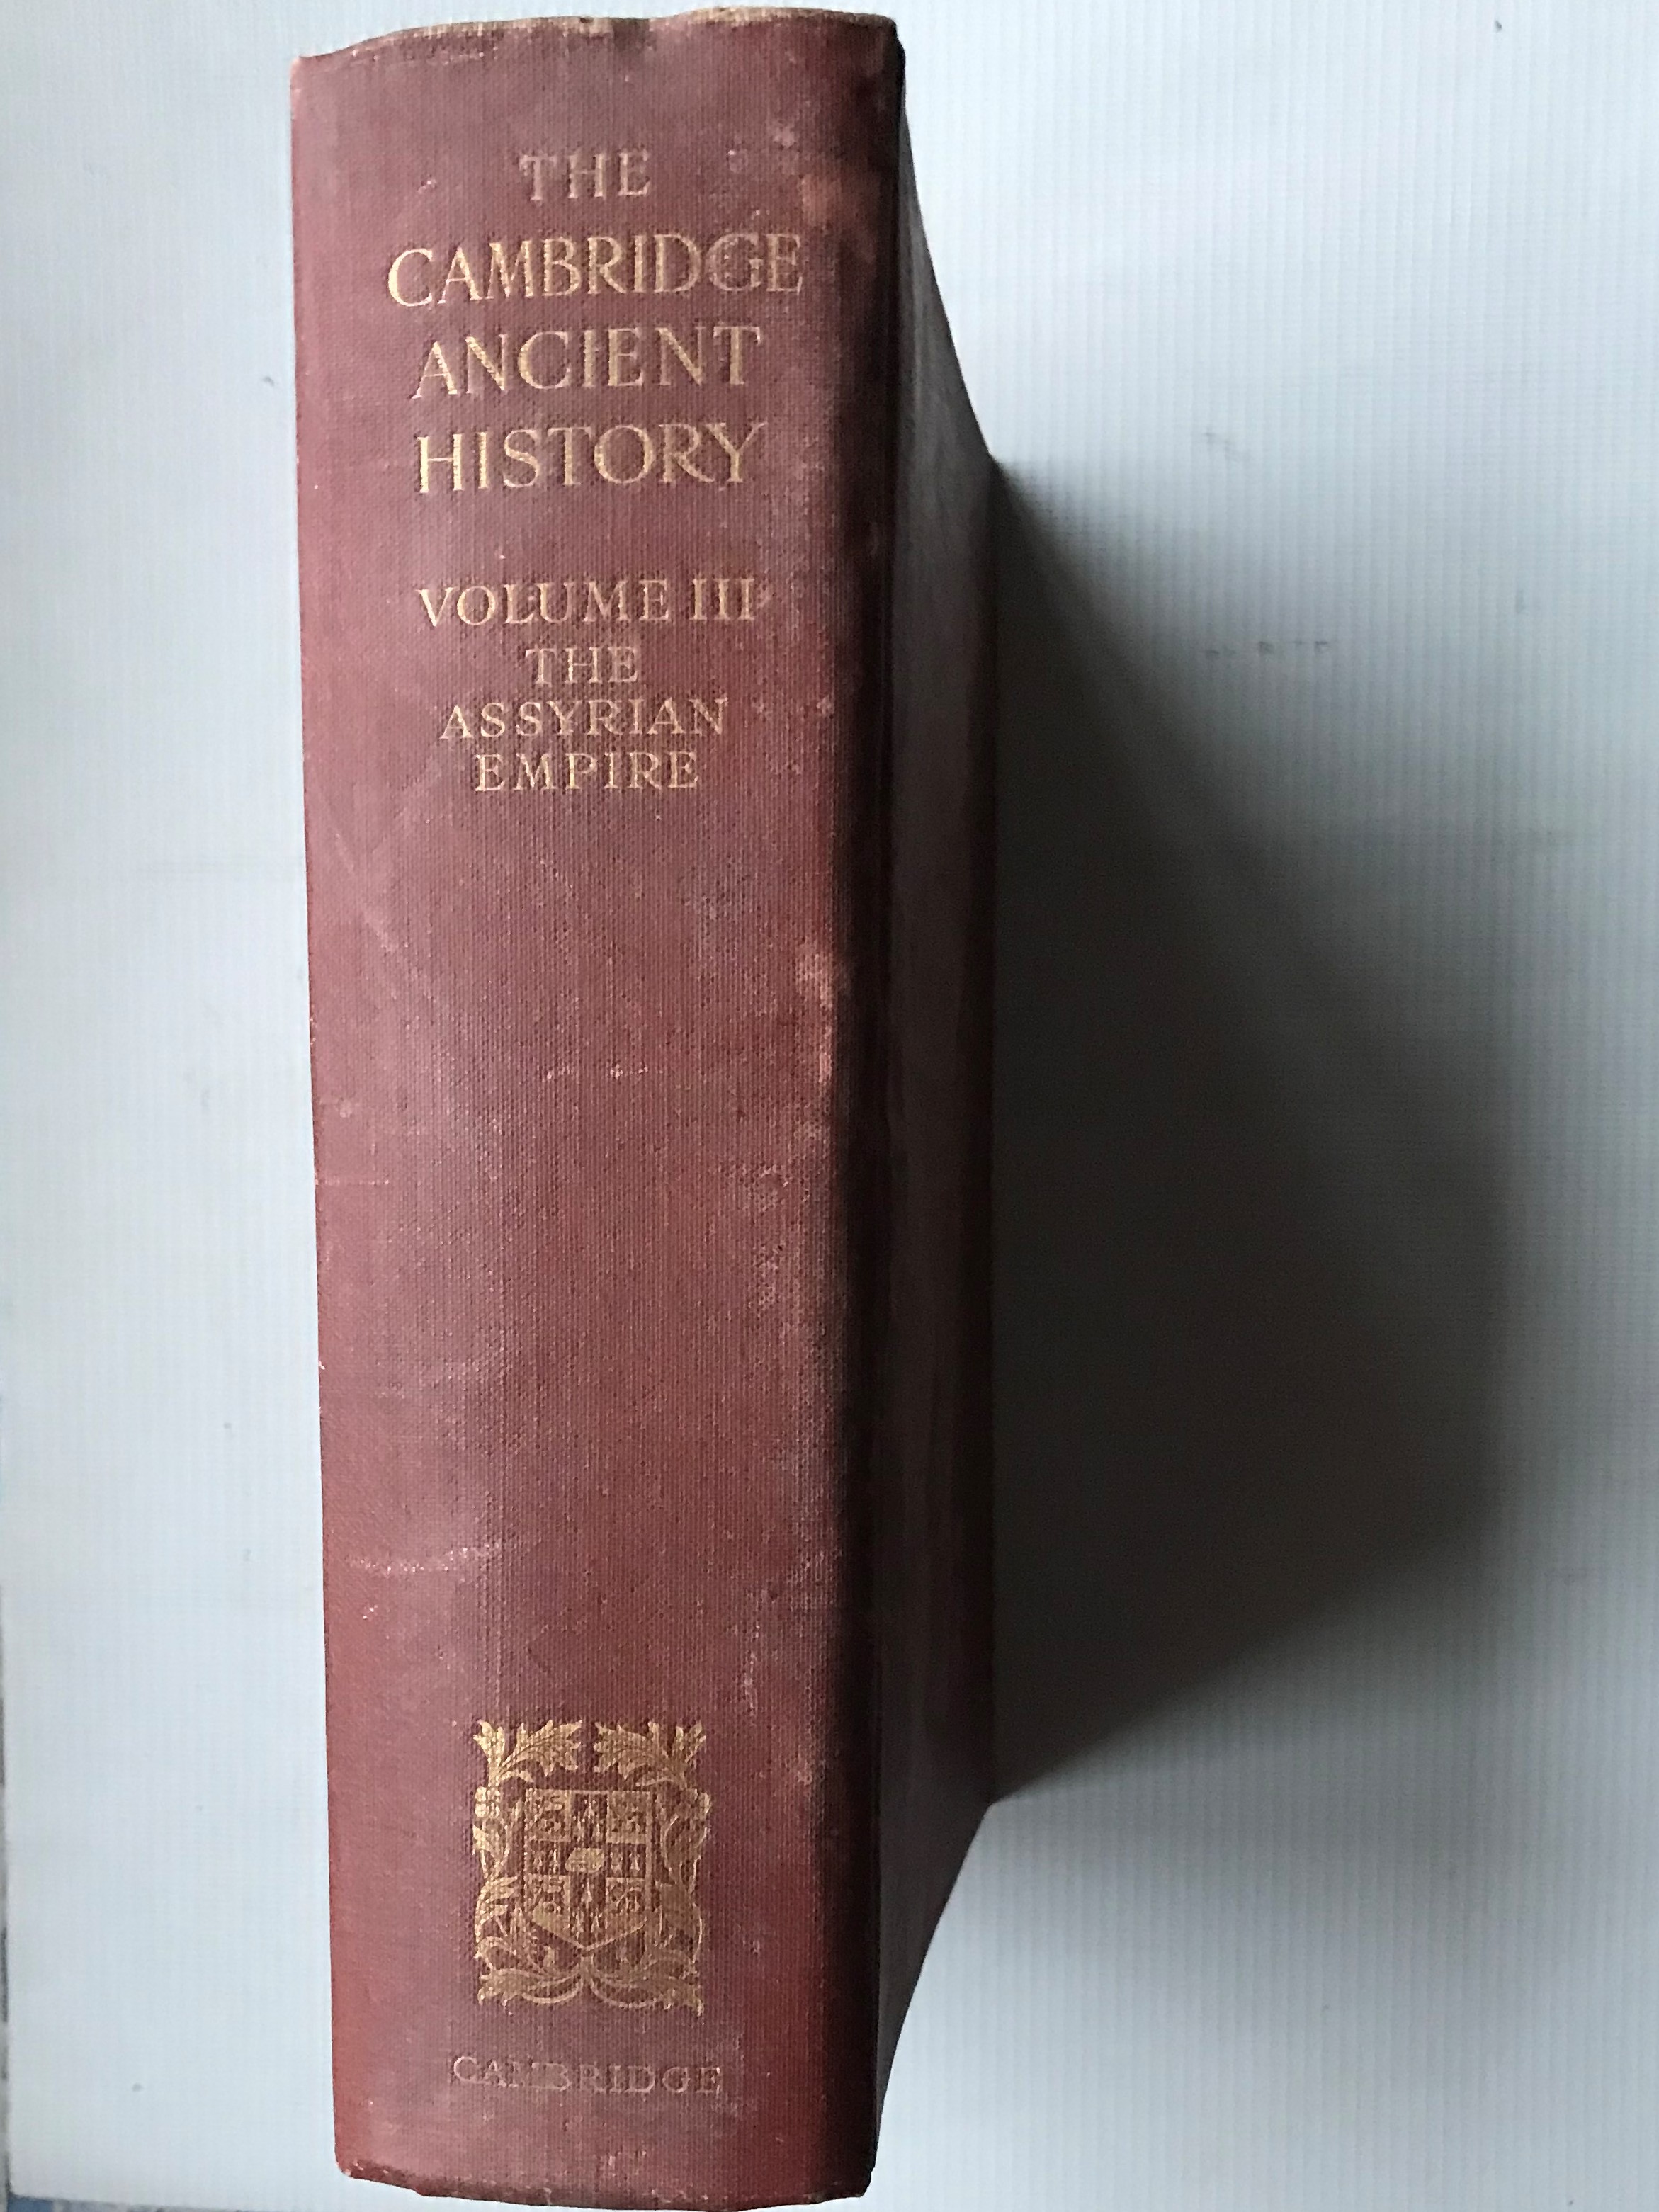 The Cambridge Ancient History Volume III: The Assyrian Empire by Bury ... - 31067992416